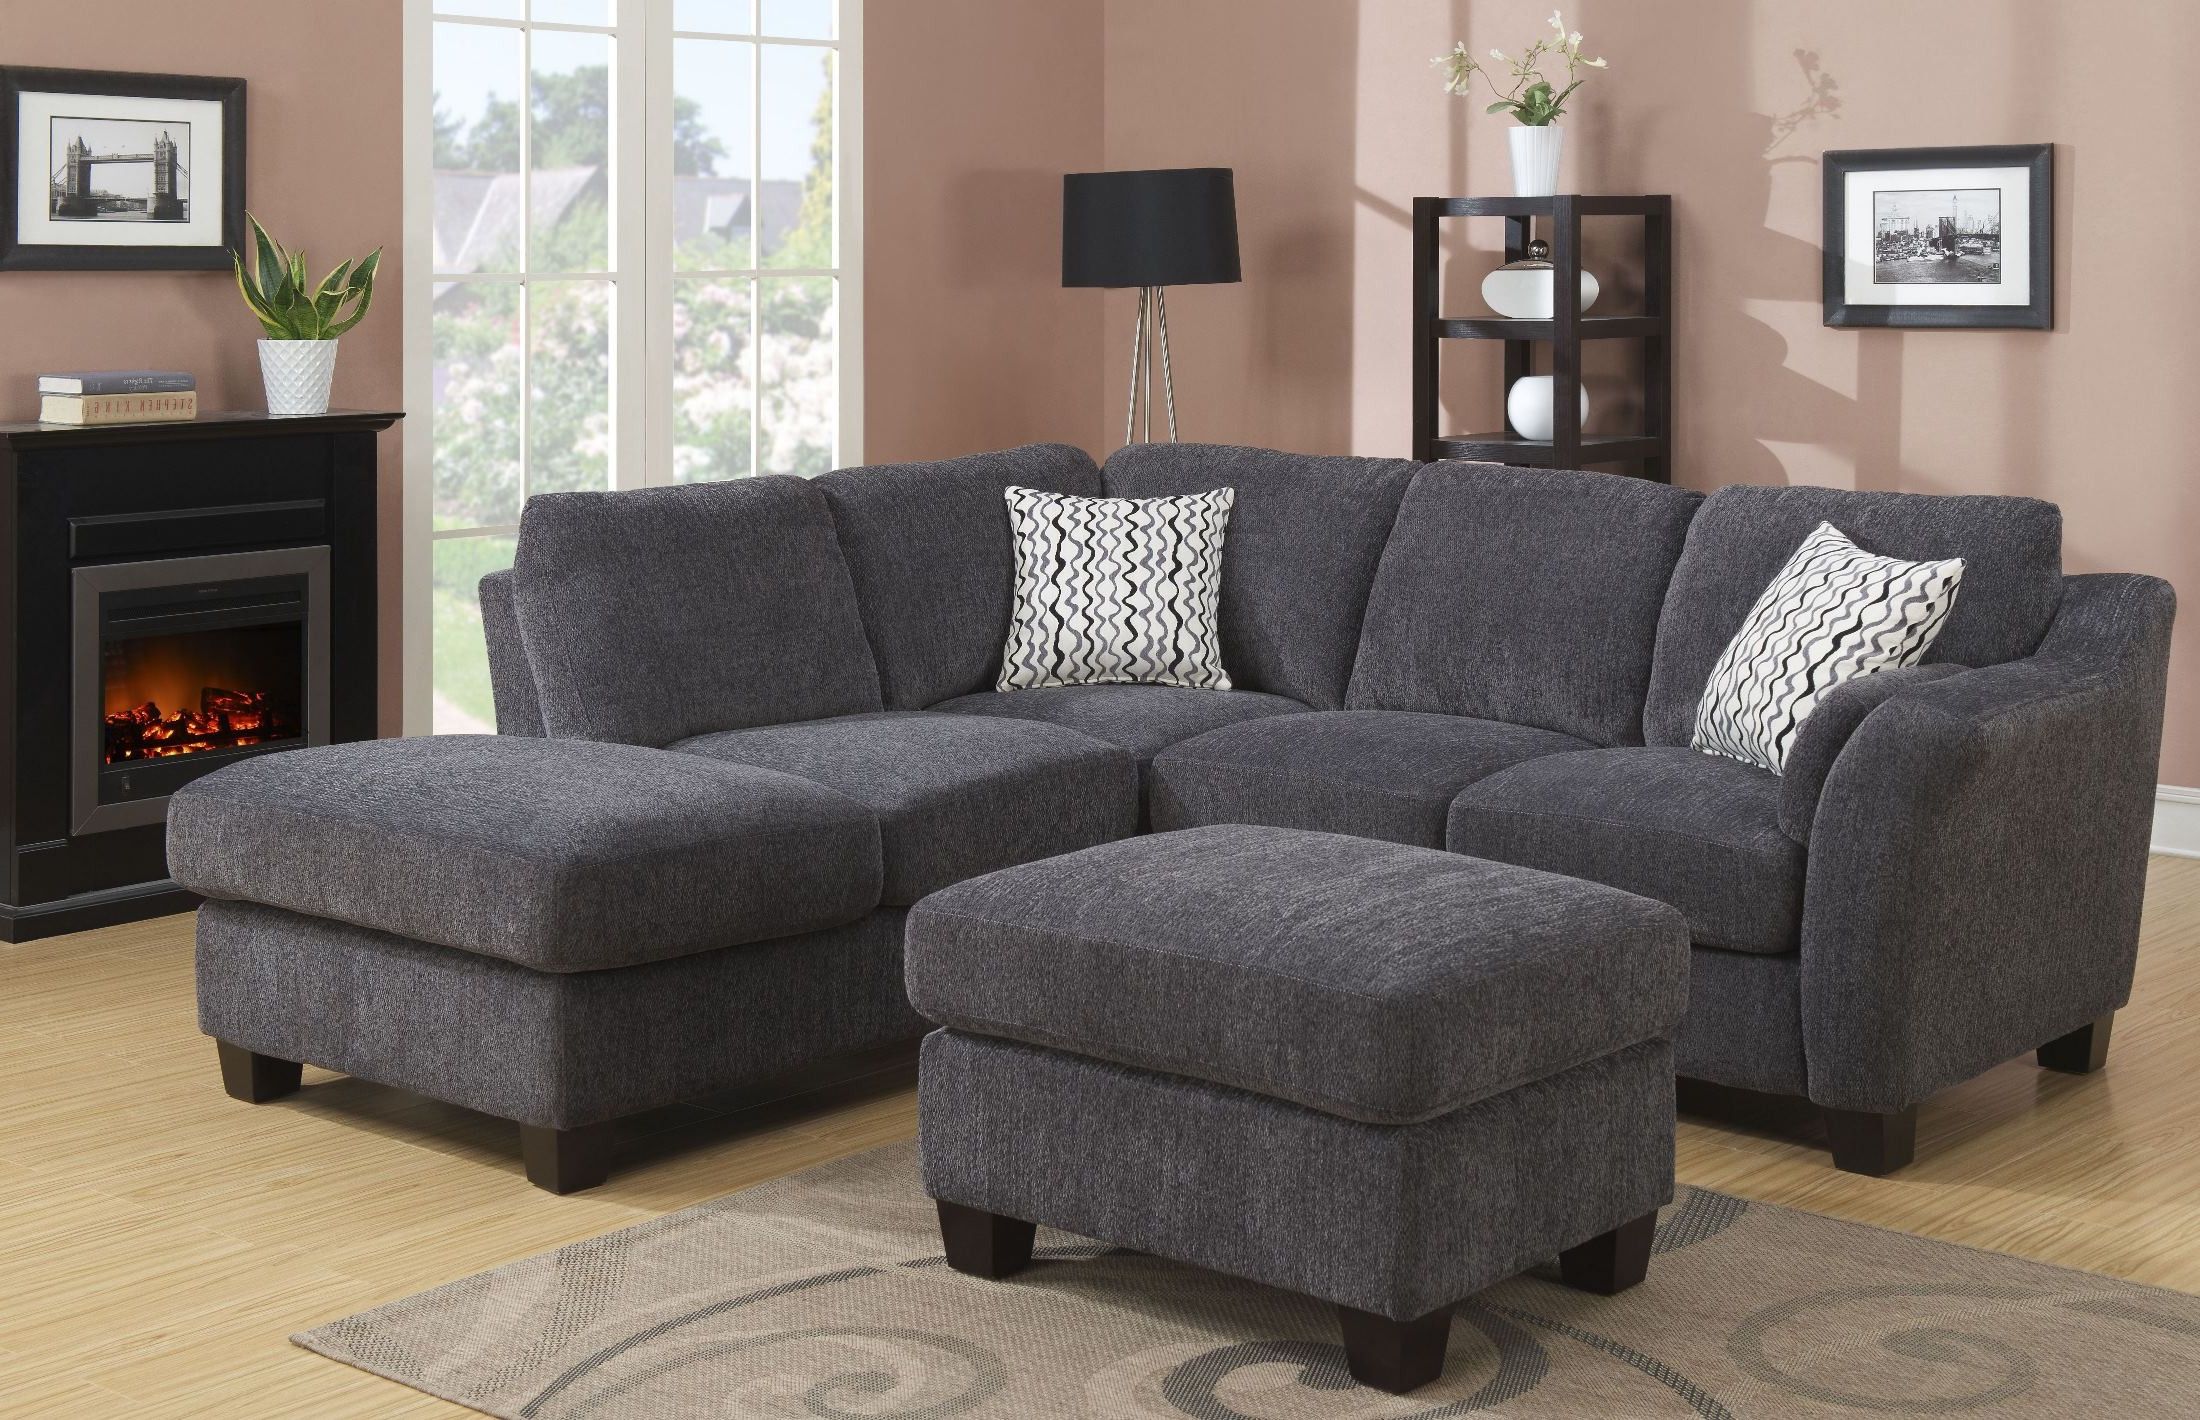 Clayton Ii Charcoal 2 Piece Sectional, U8060e 11 12 23 K For Most Recent 2pc Burland Contemporary Sectional Sofas Charcoal (View 23 of 25)